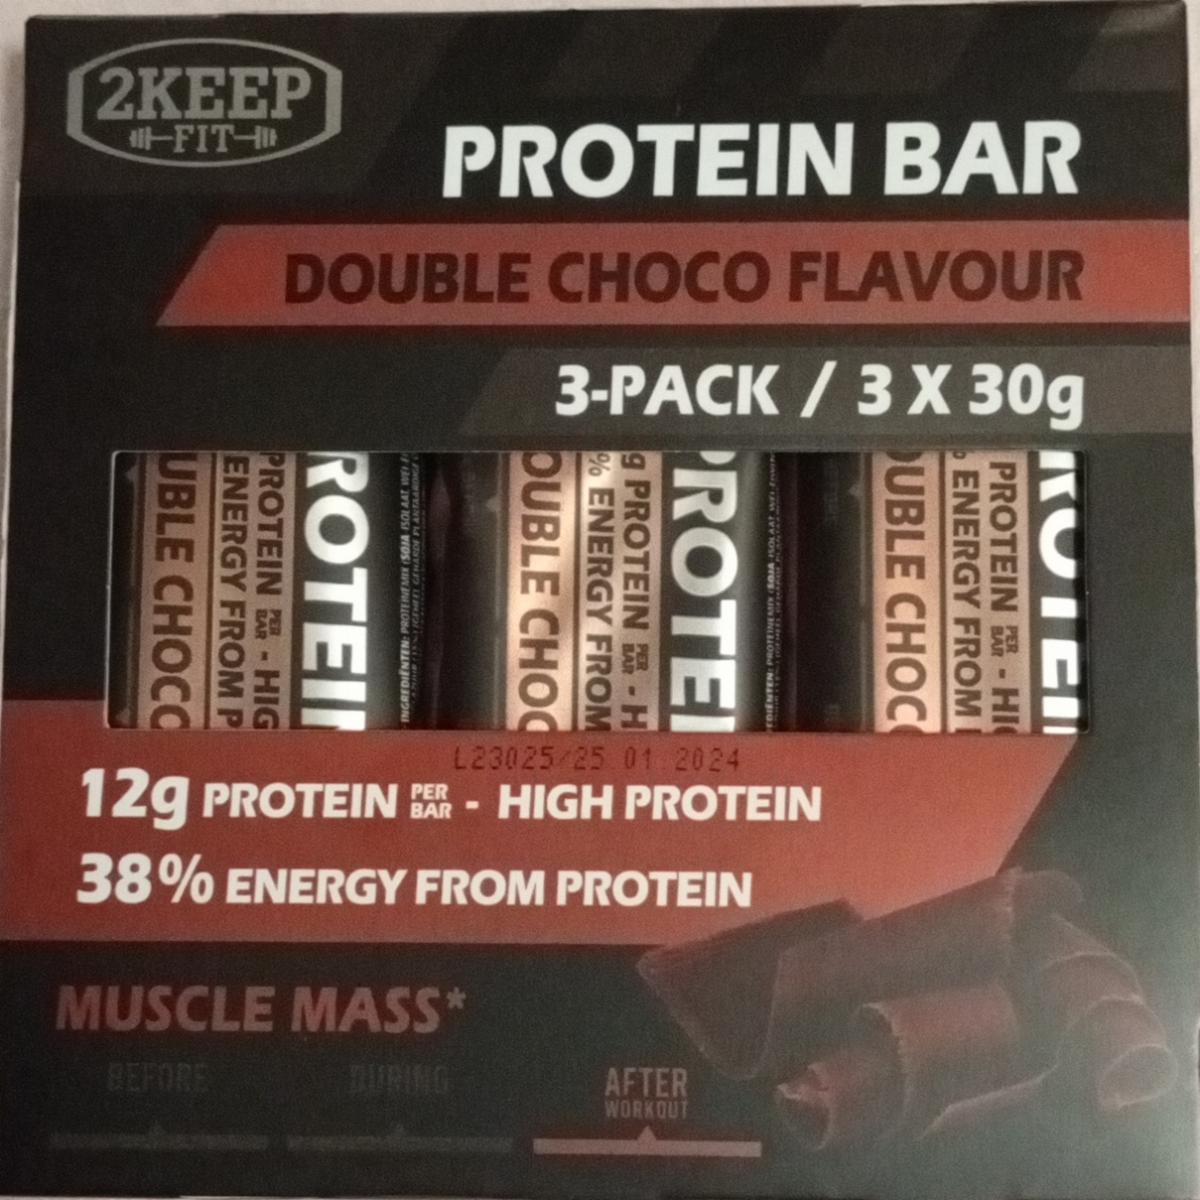 Fotografie - Protein Bar Double choco flavour 2Keep Fit